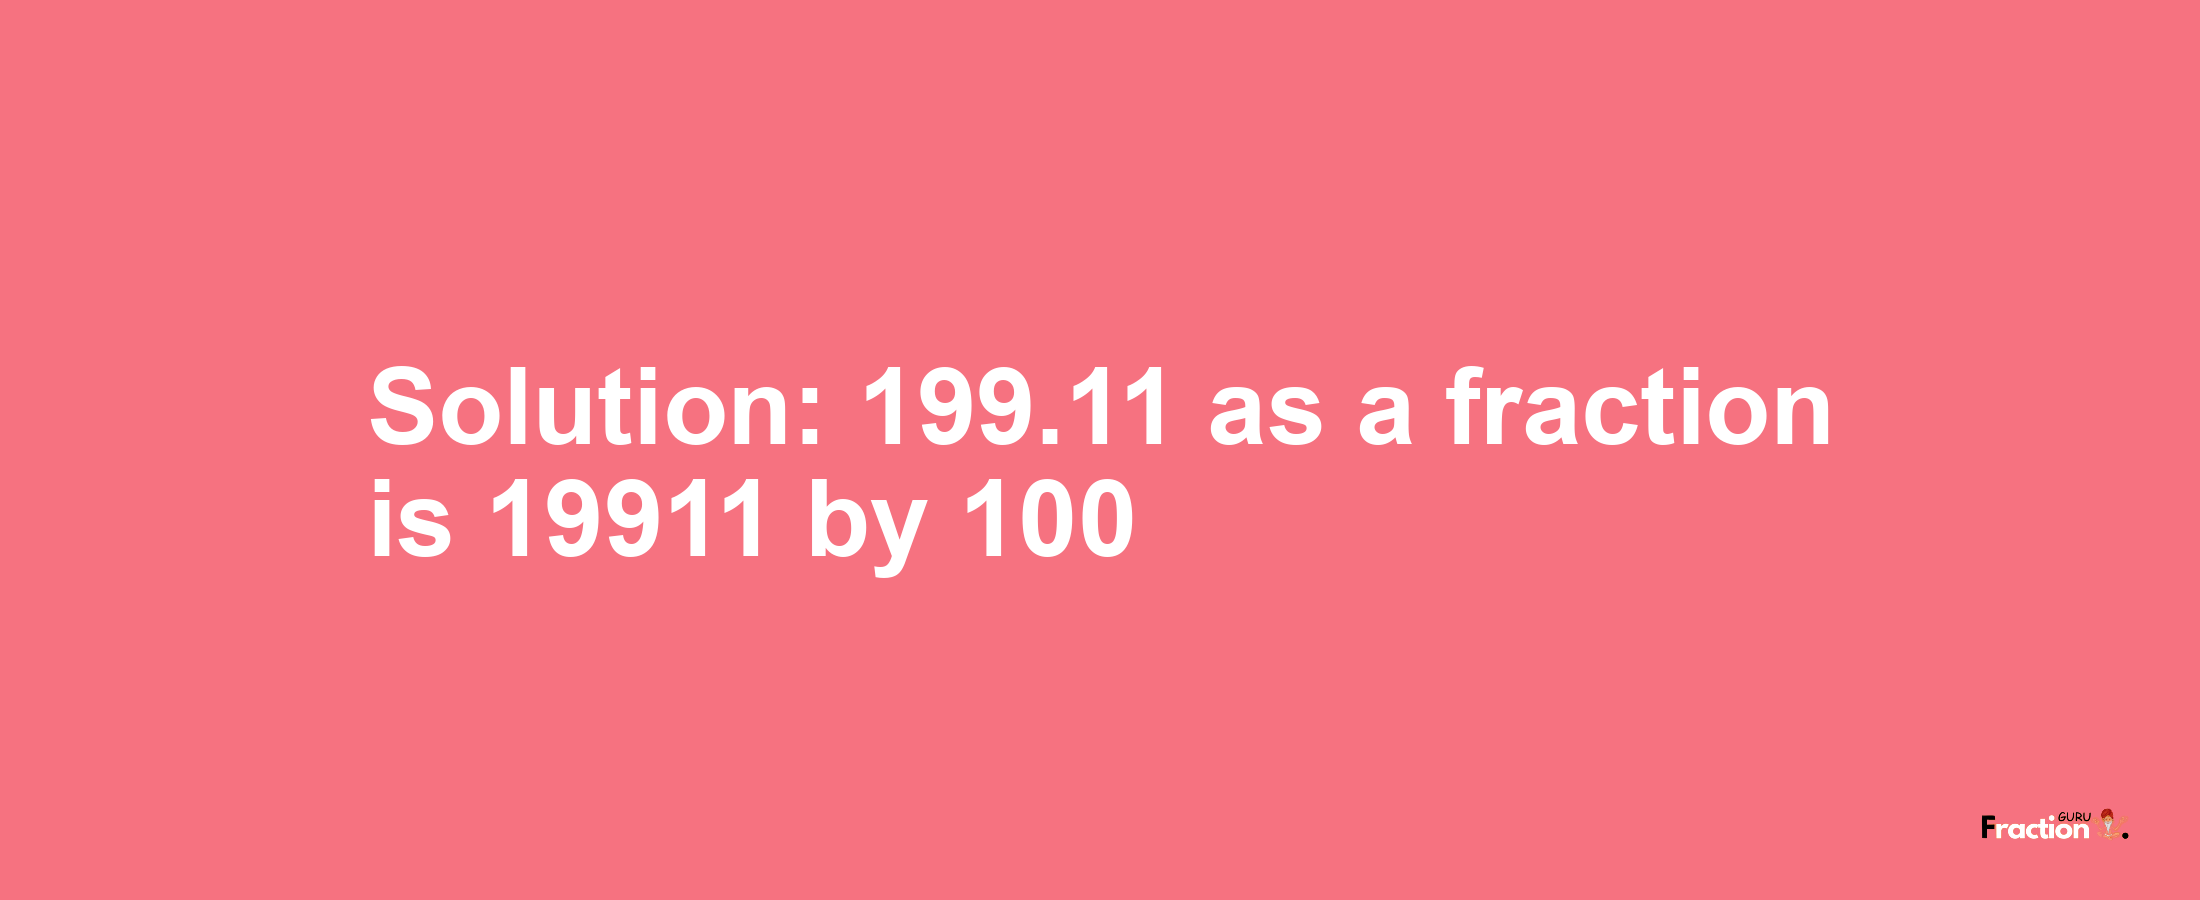 Solution:199.11 as a fraction is 19911/100